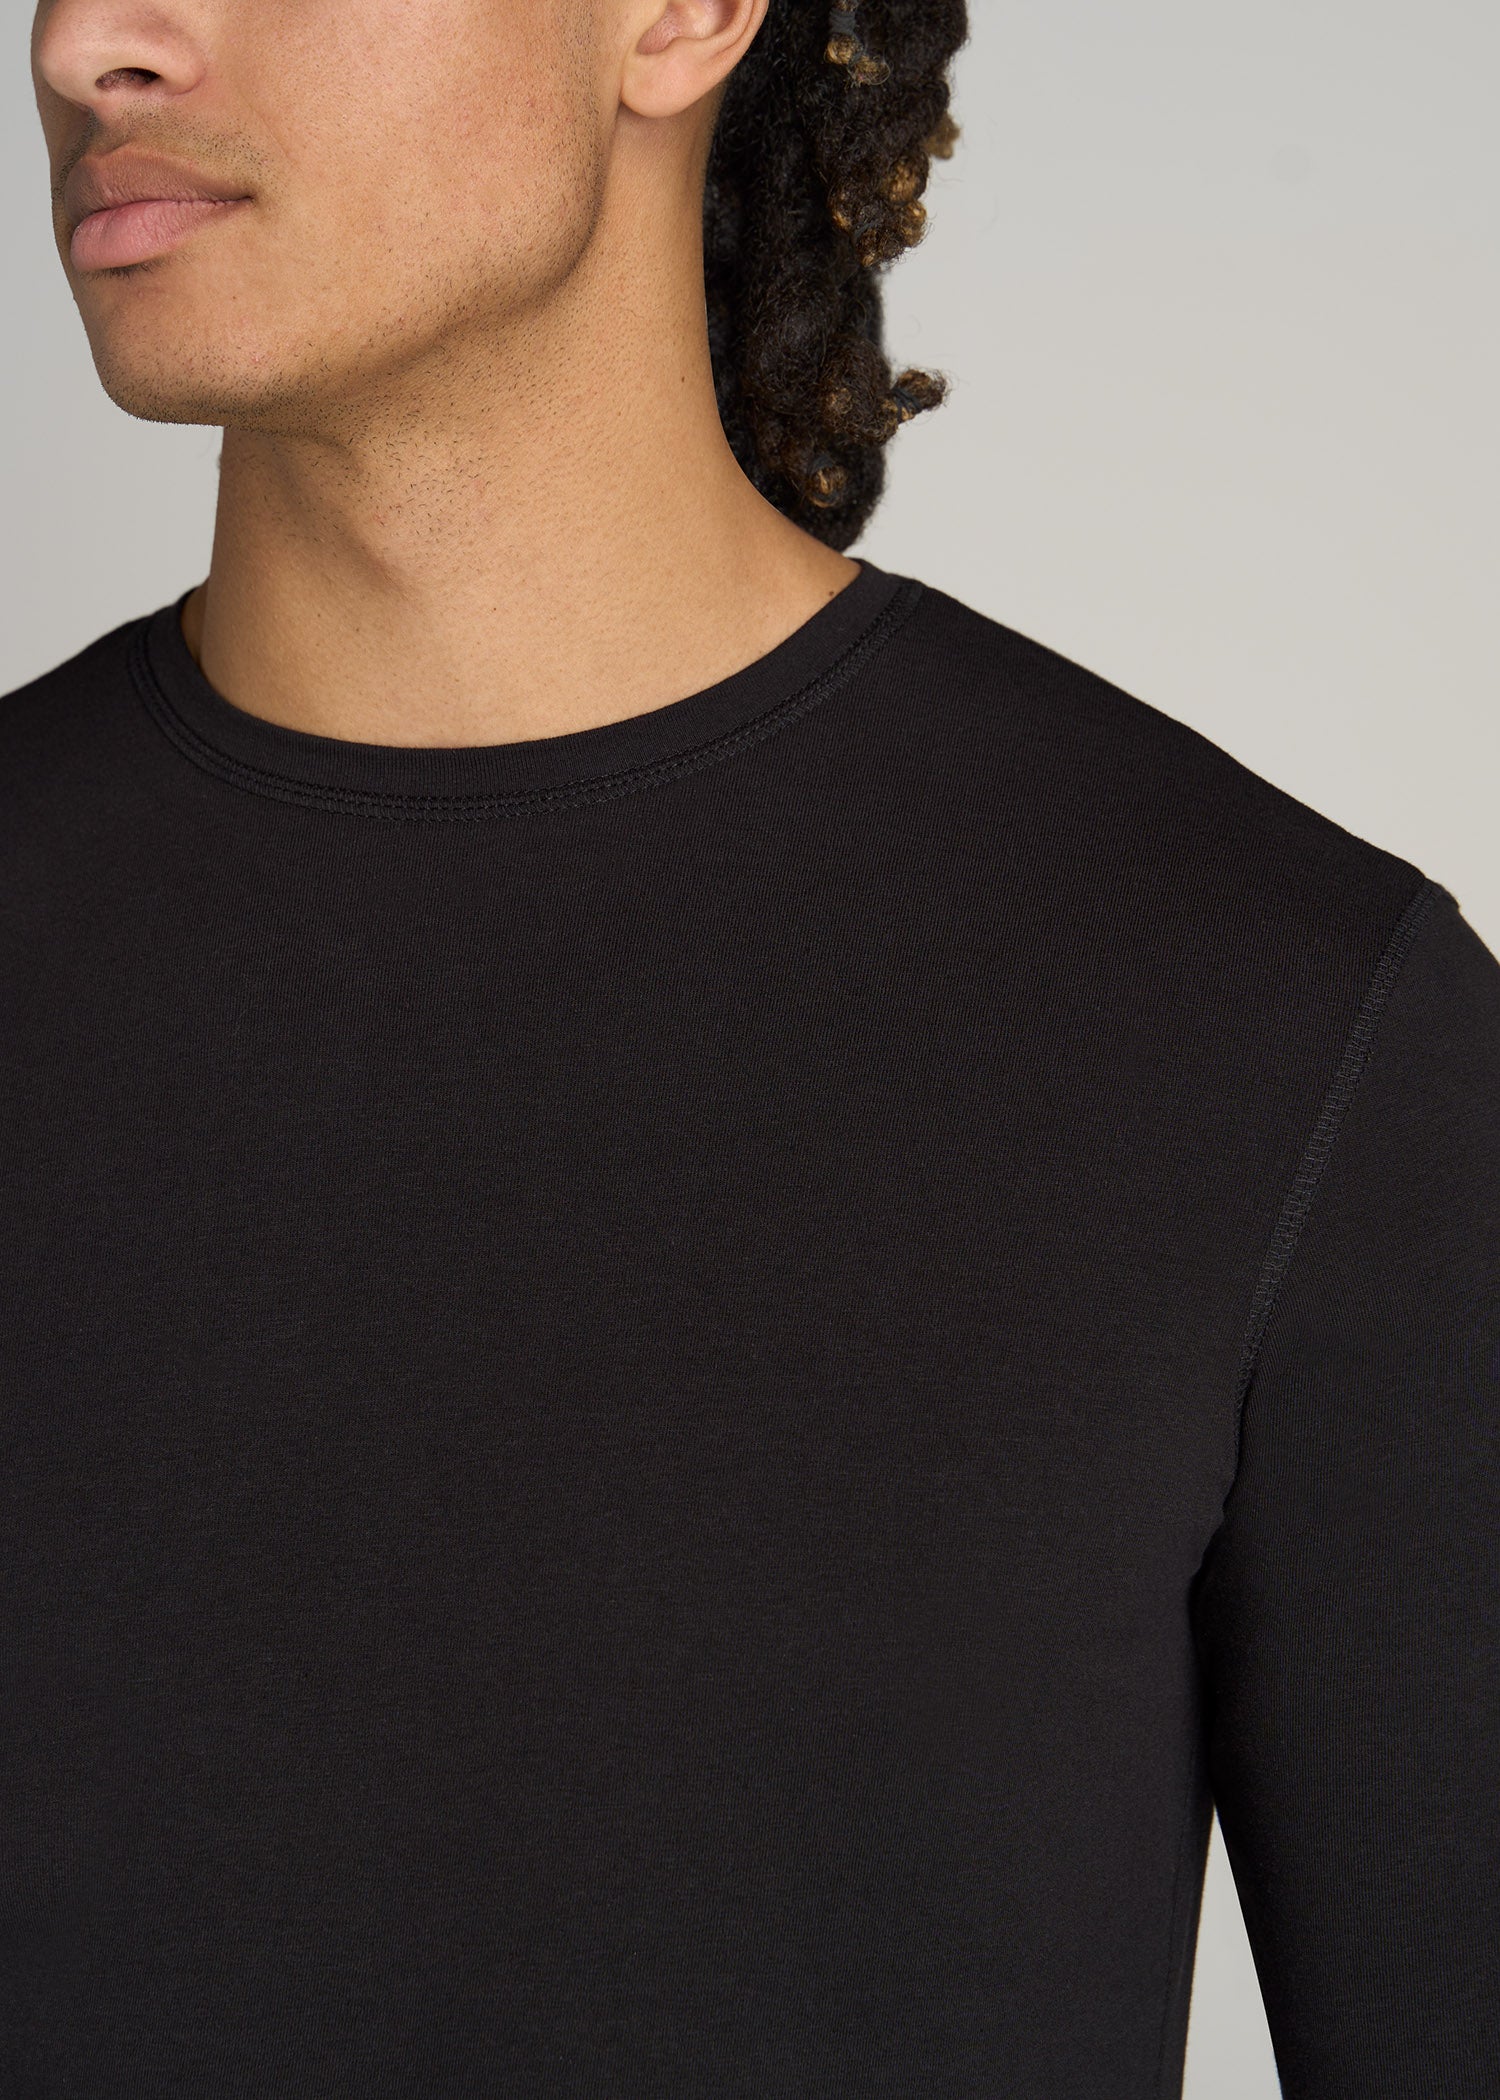 Active Basic Athletic Fitted Plain Long Sleeves Round Crew Neck T Shirt Top  (Medium, Black)